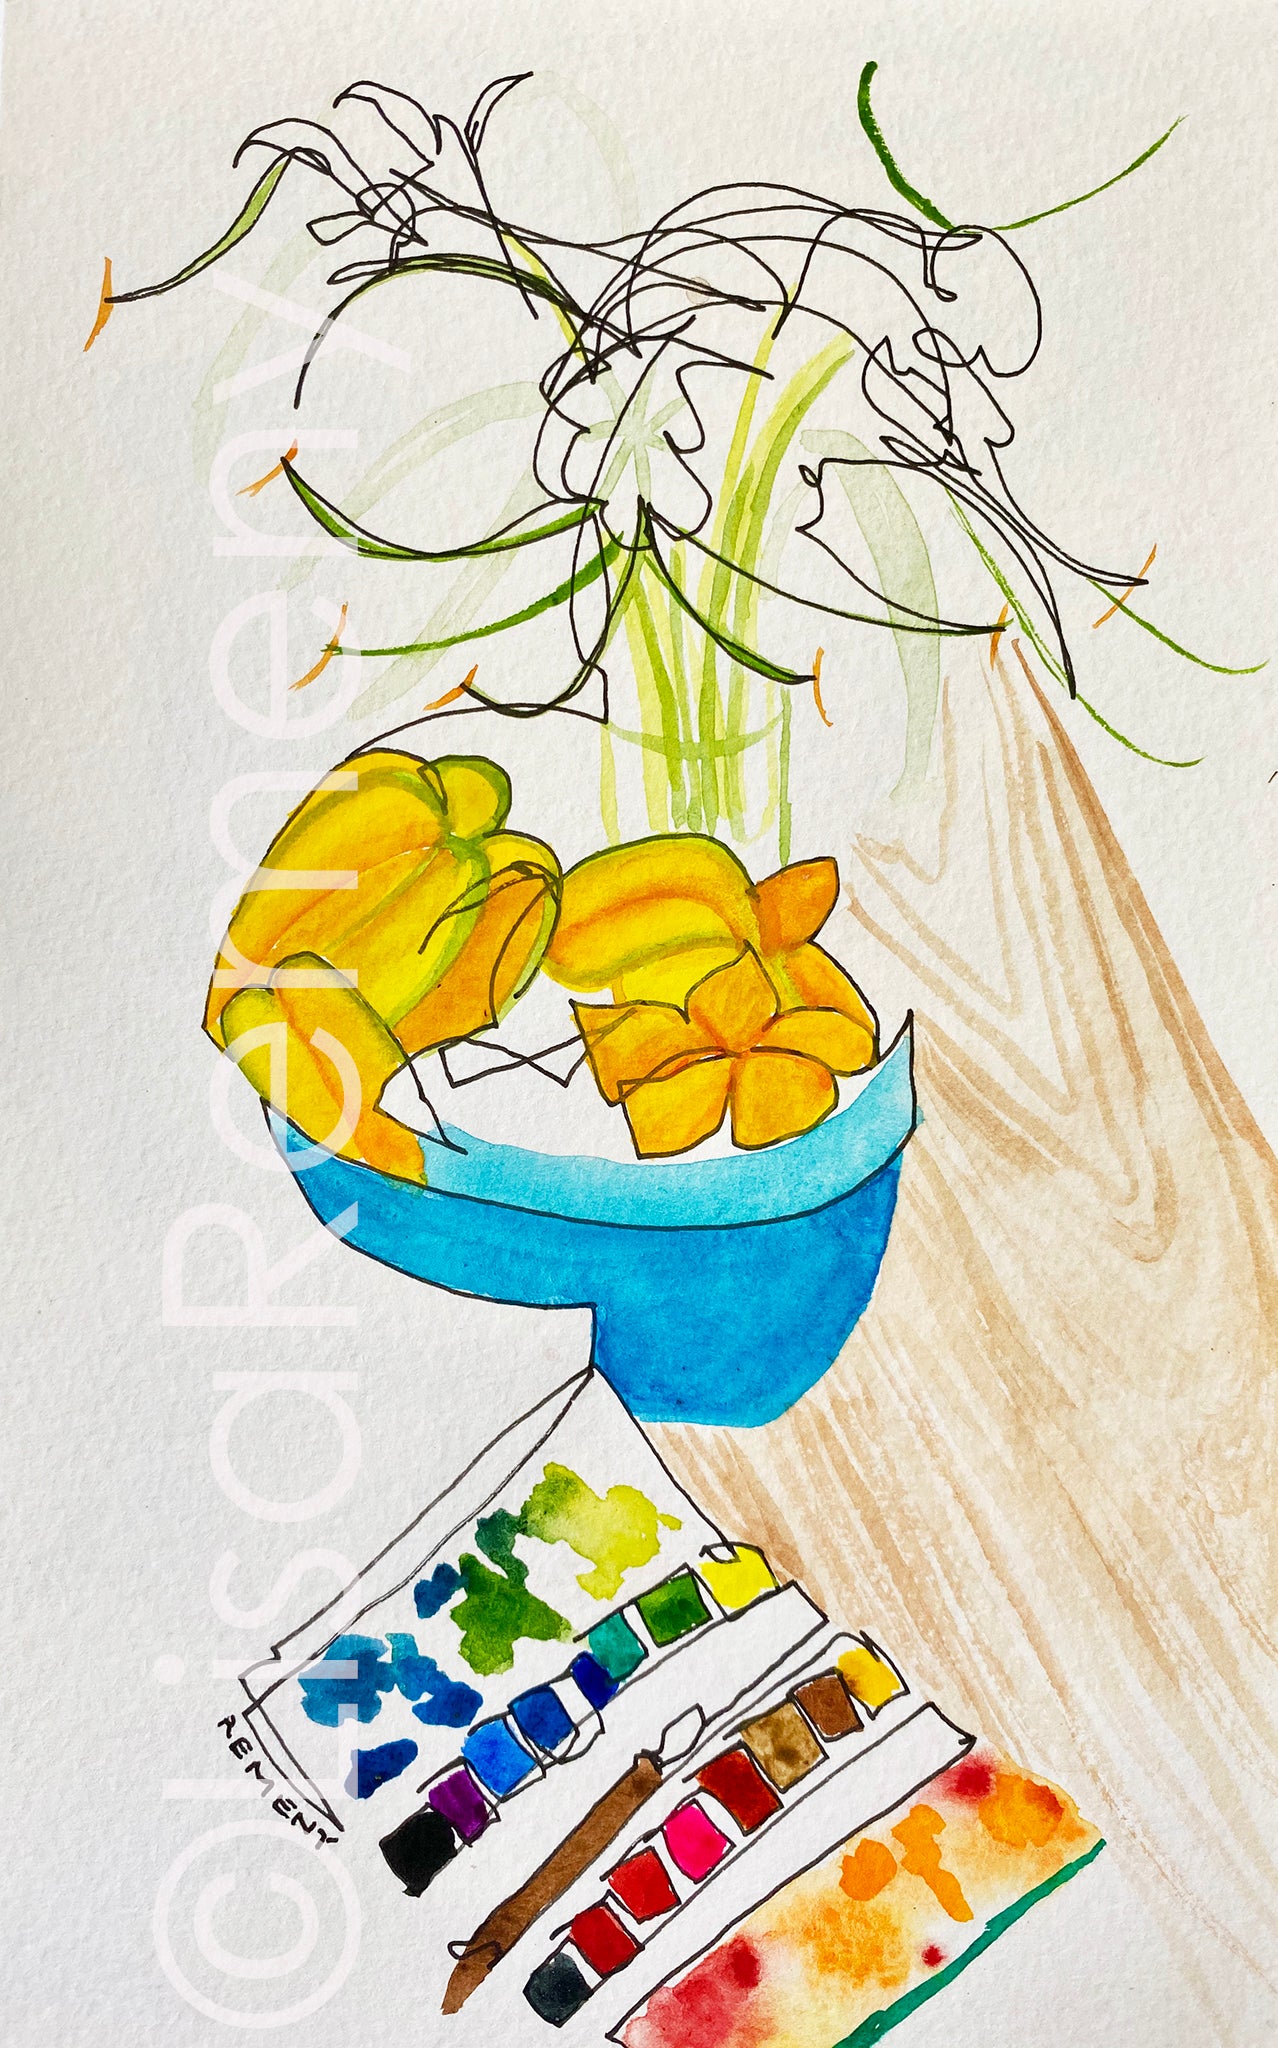 Watercolor + Ink on Paper - Star Fruit and Tican Lilies